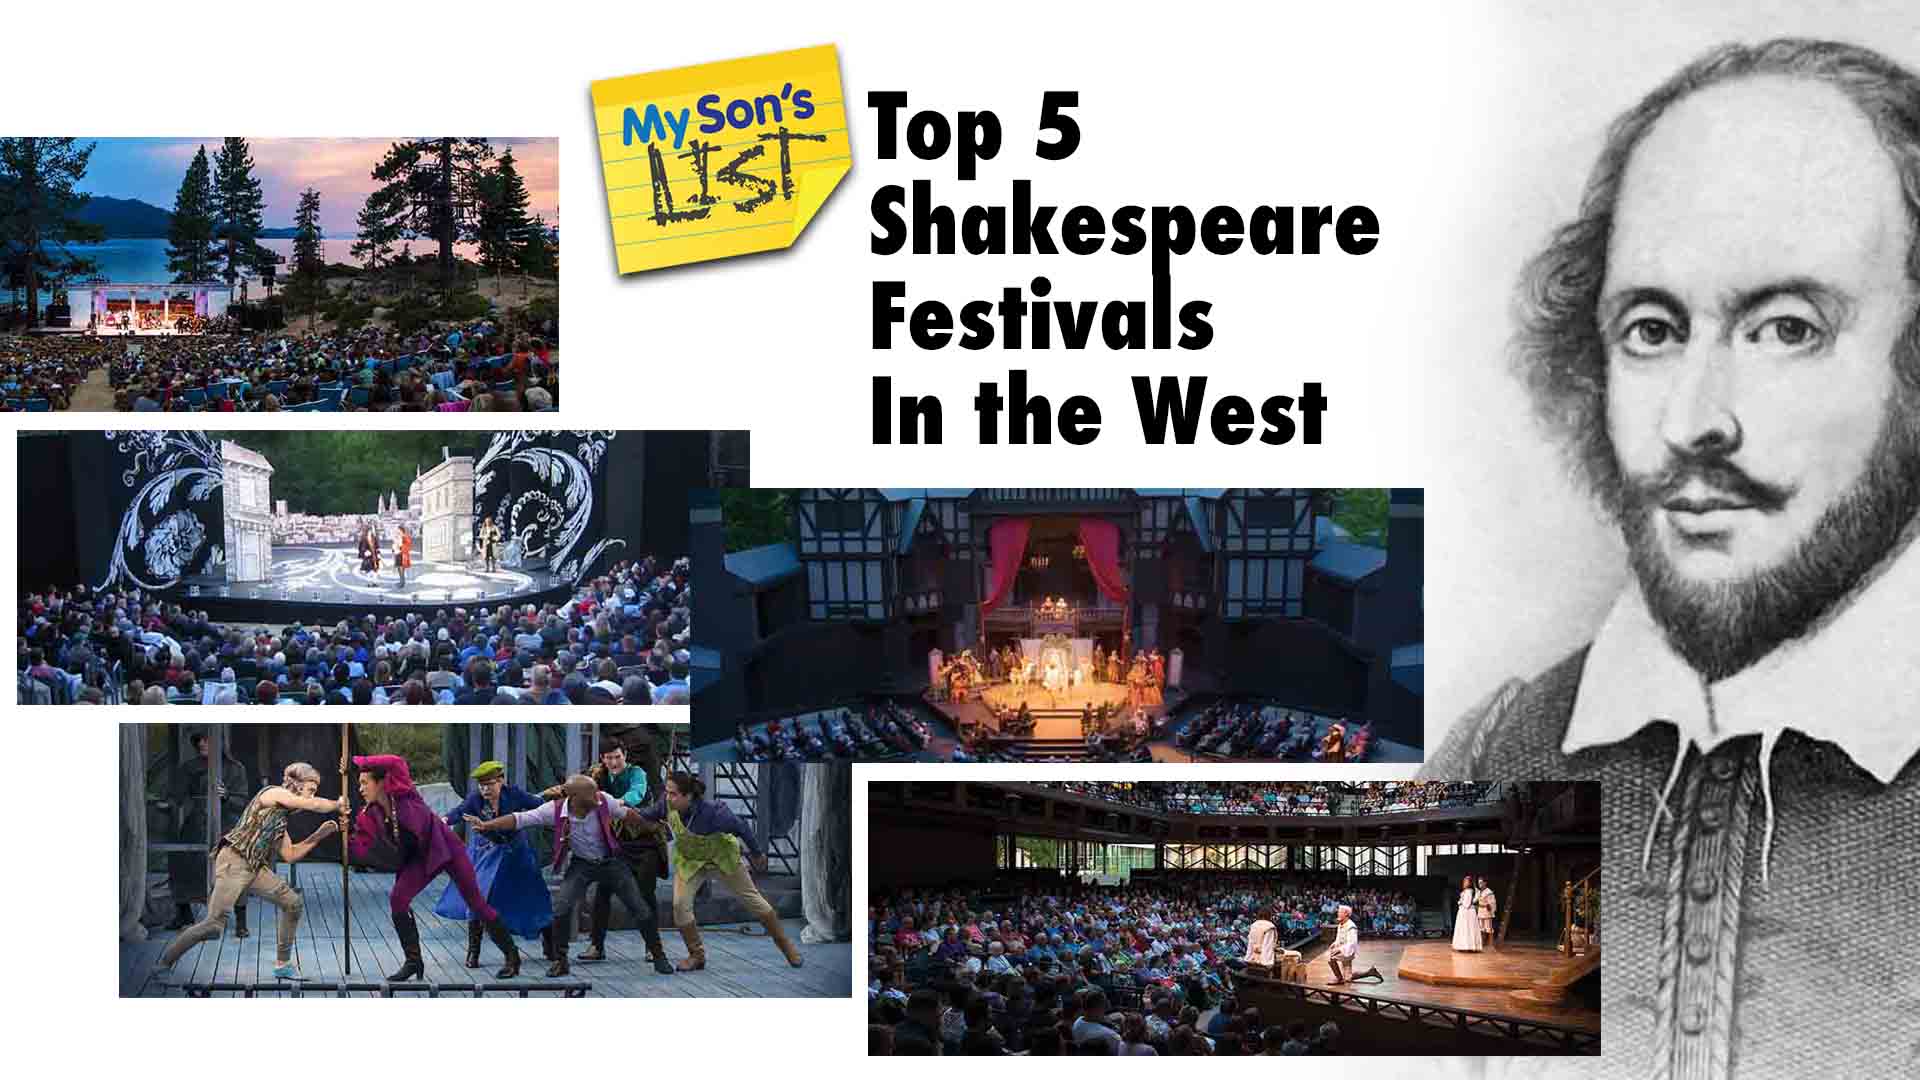 Top 5 U.S. Shakespeare Festivals In the West